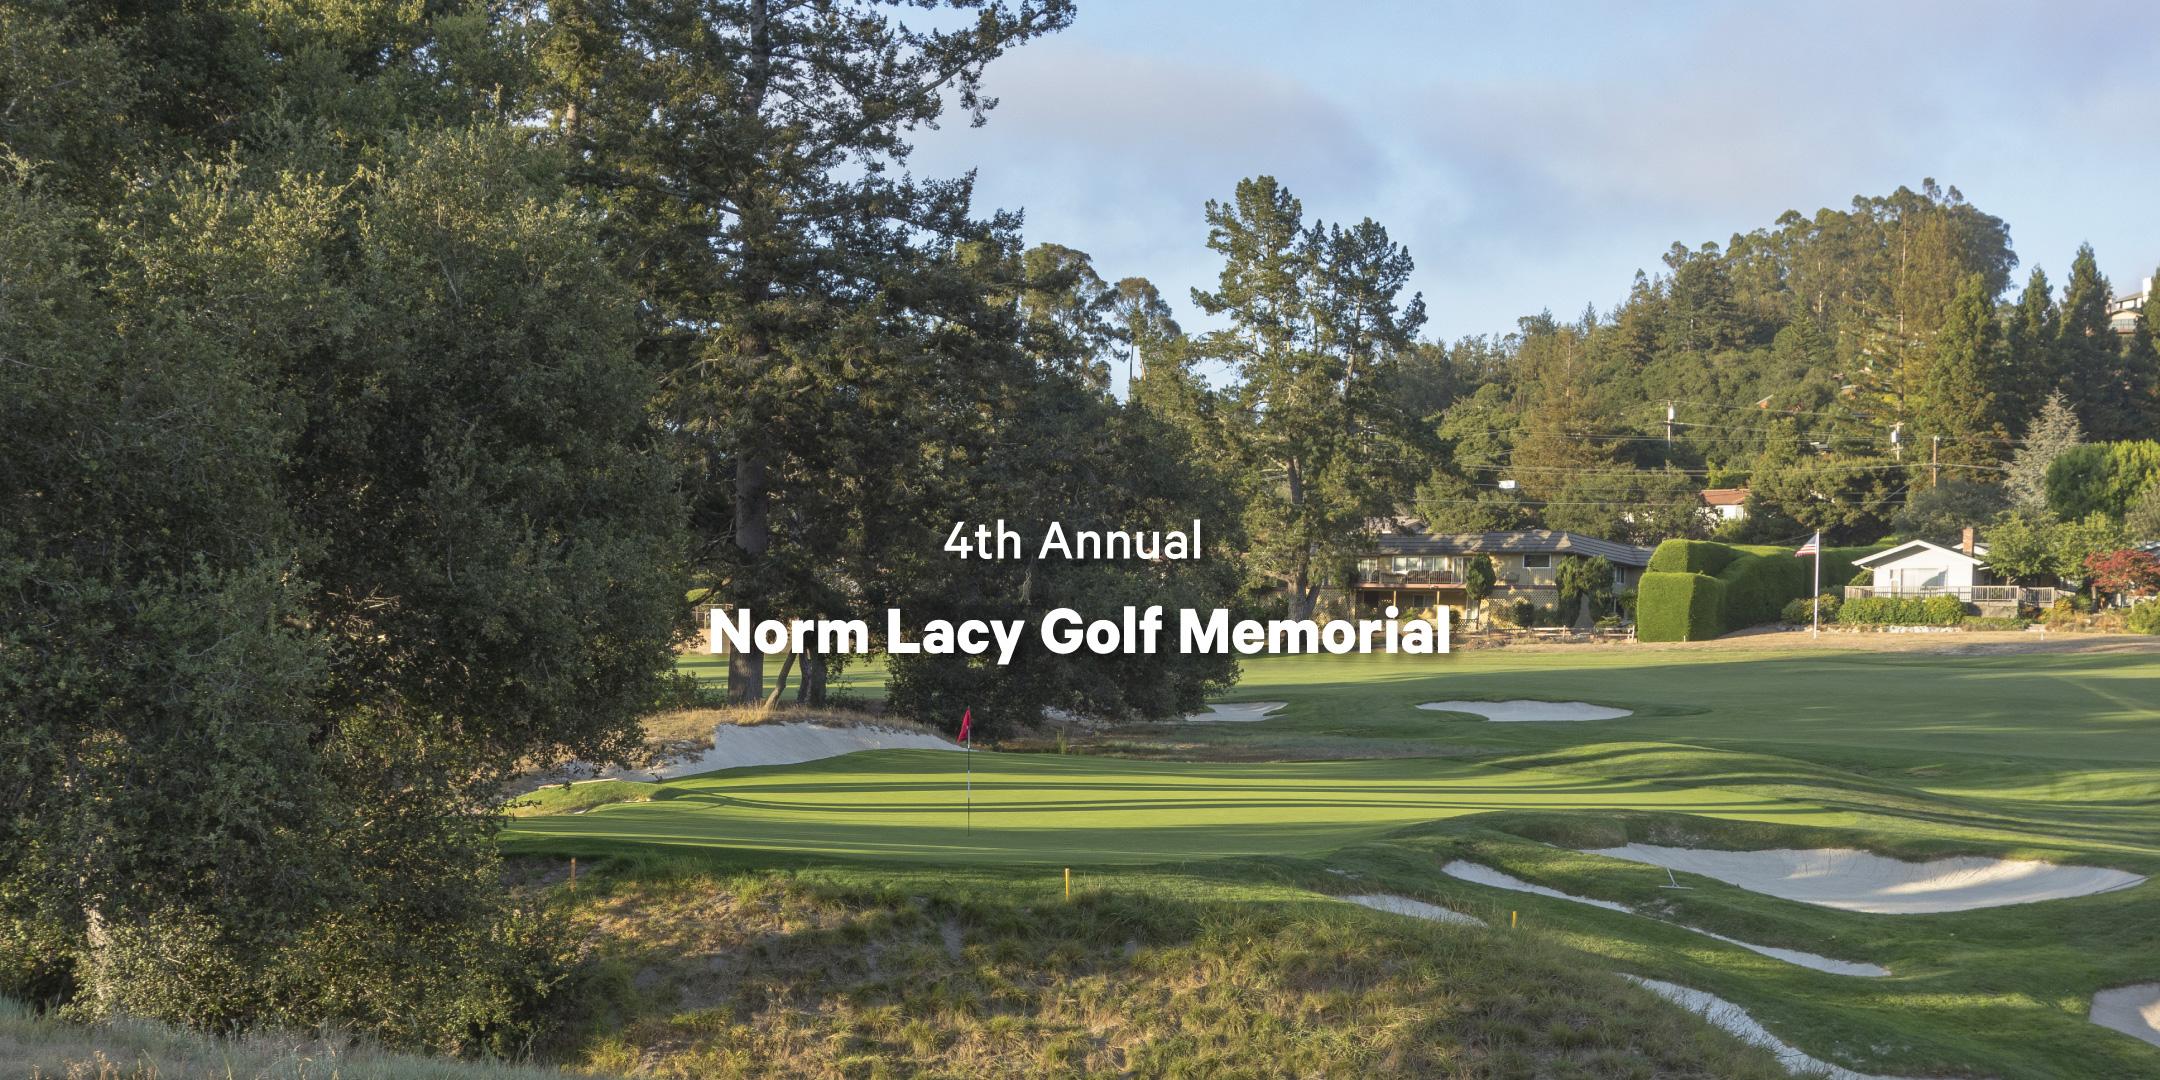 4th Annual NORM LACY Golf Memorial